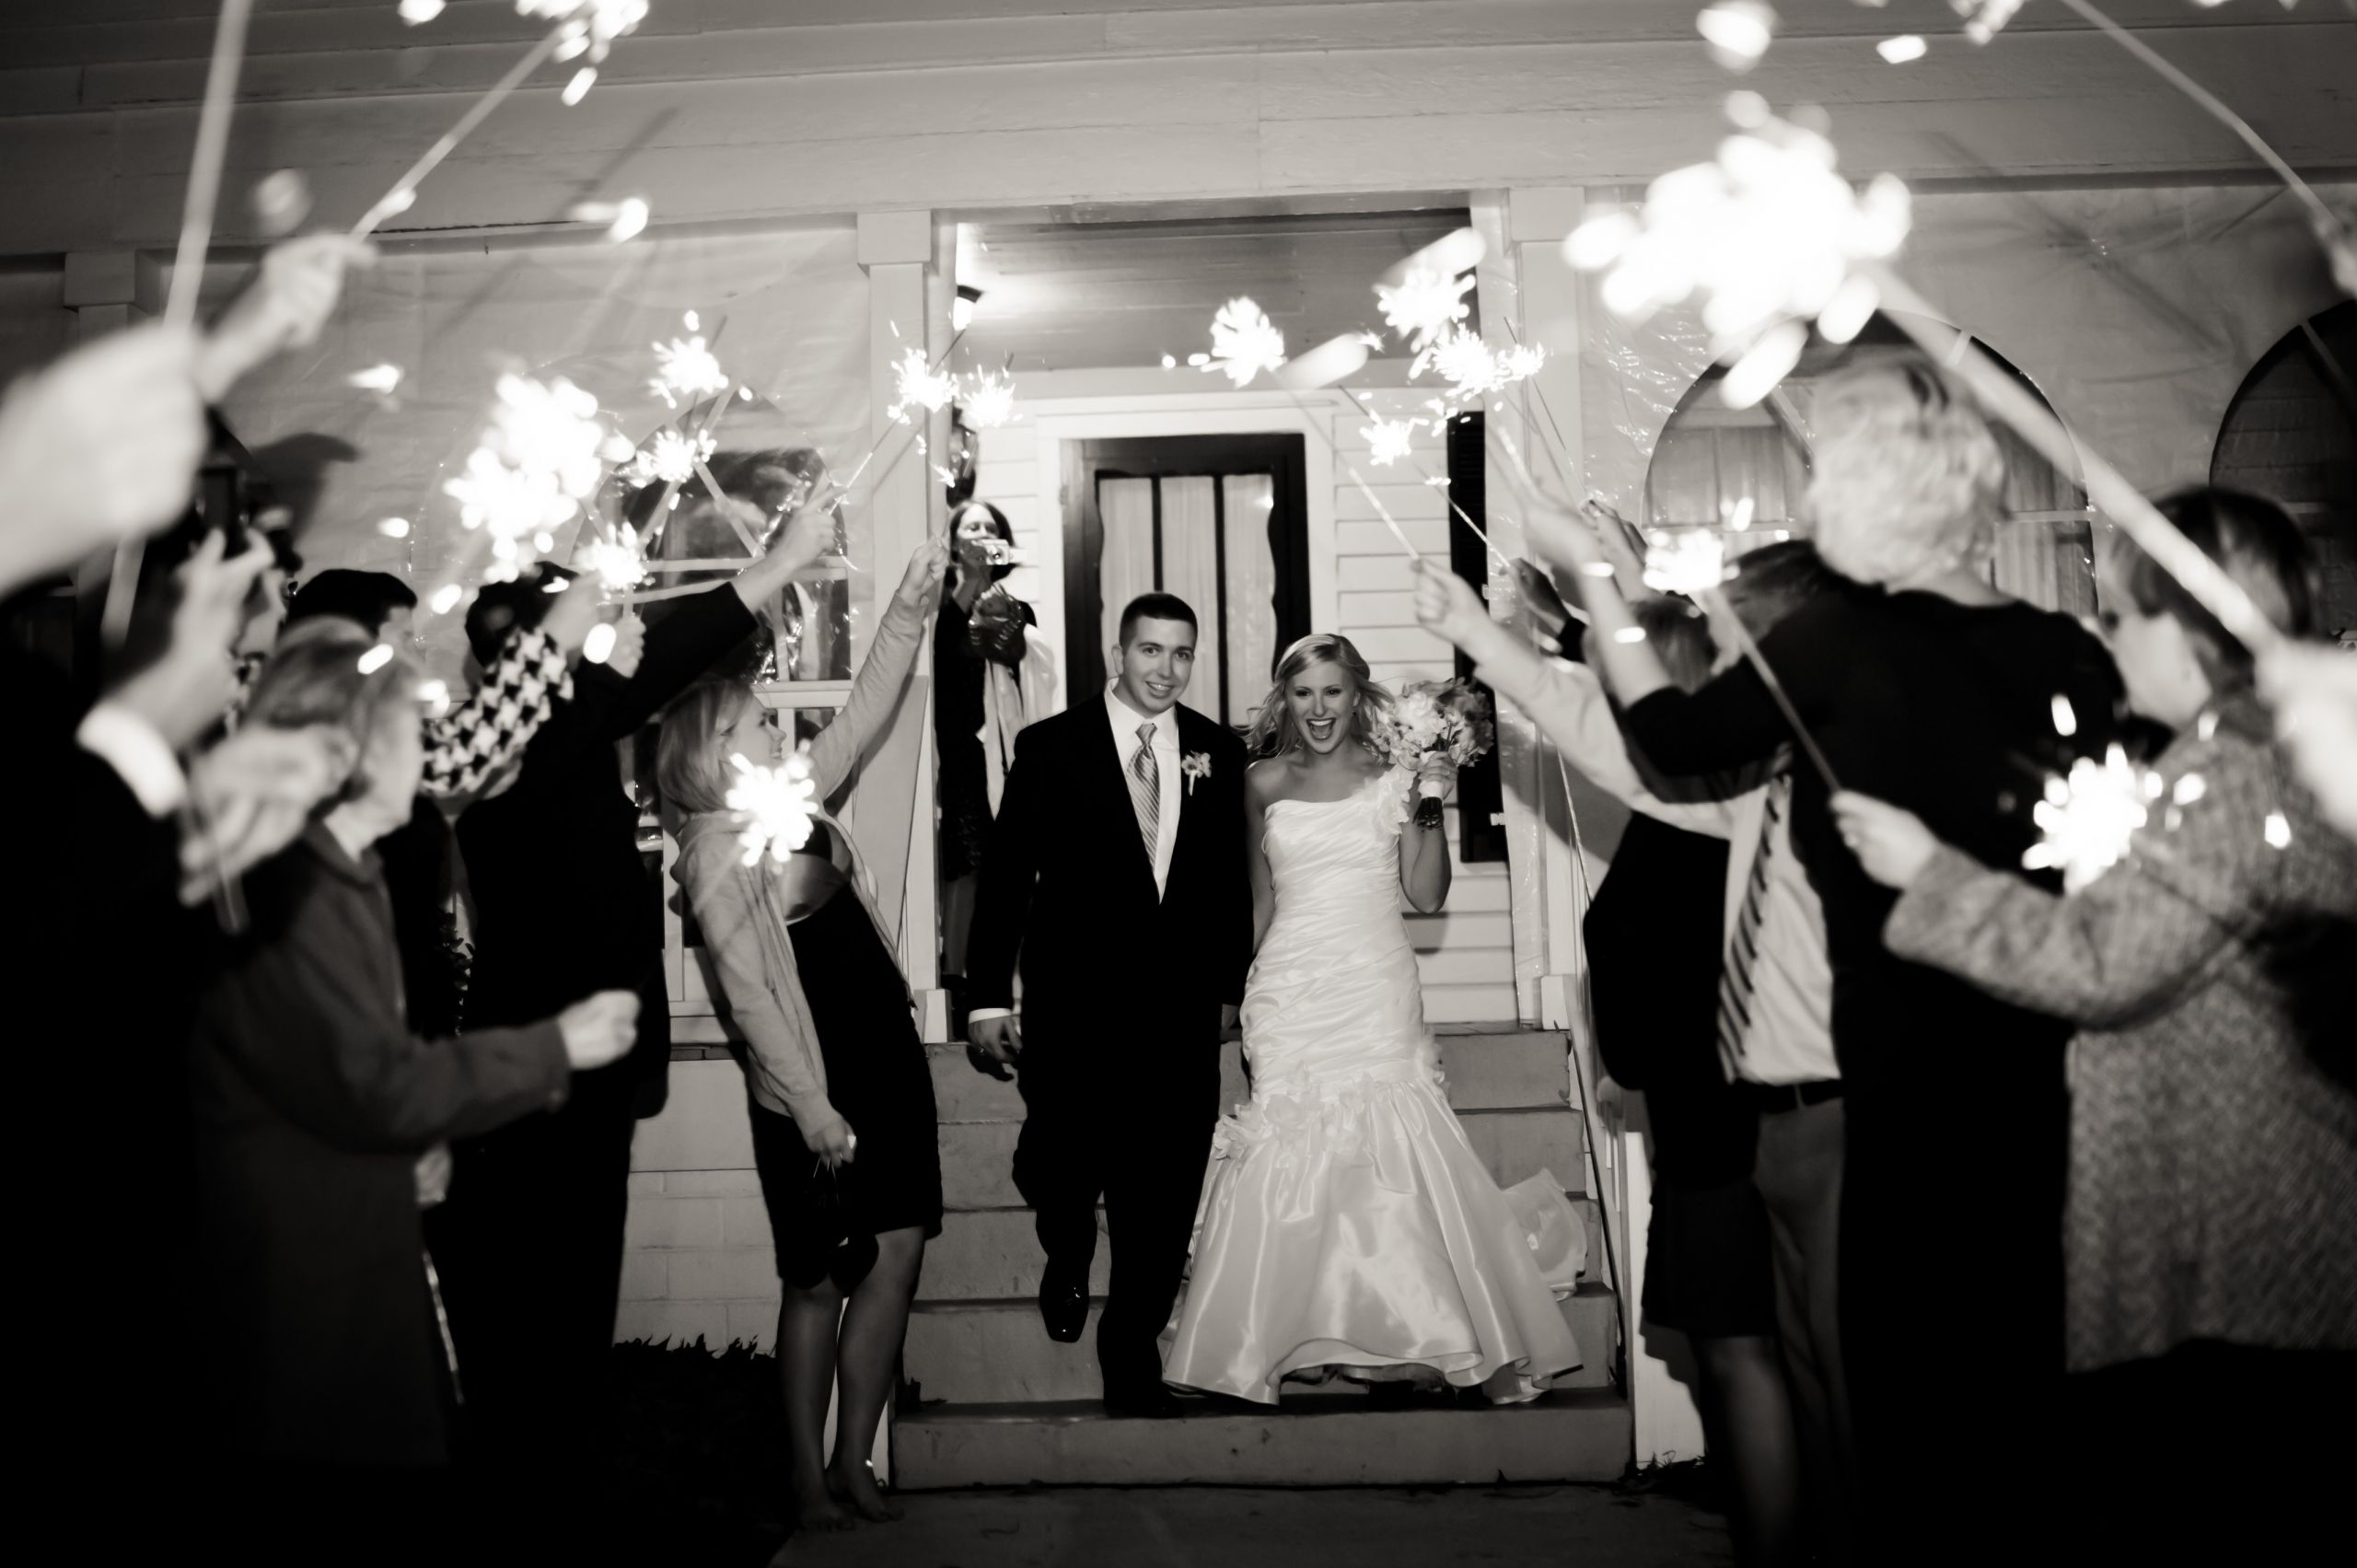 Wedding Sparklers For Sale
 Where to Buy Wedding Sparklers